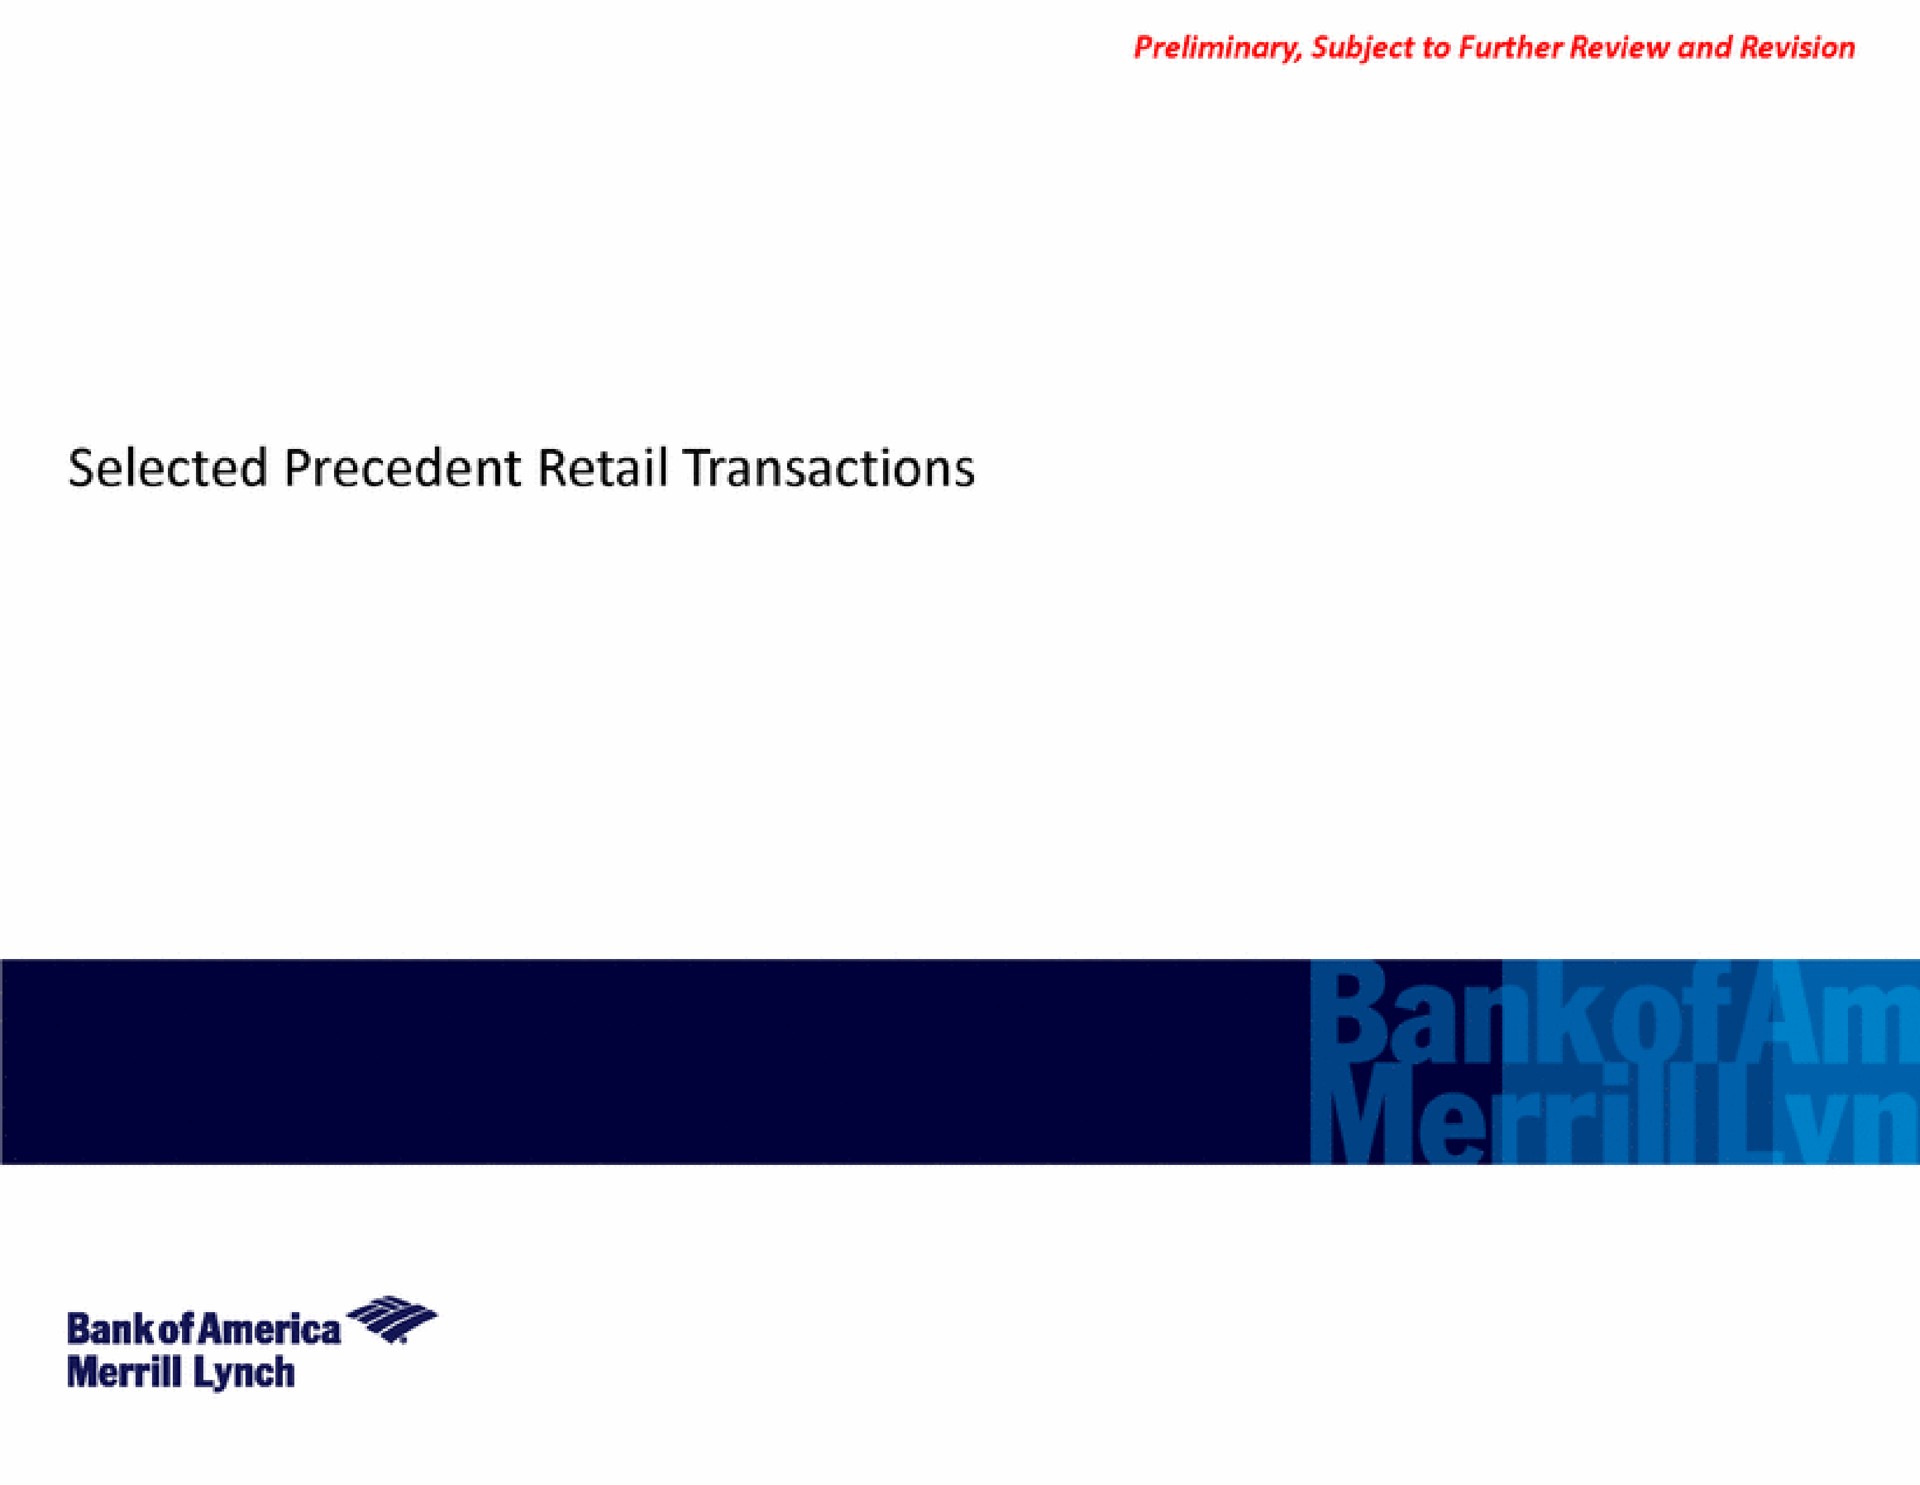 selected precedent retail transactions lynch | Bank of America